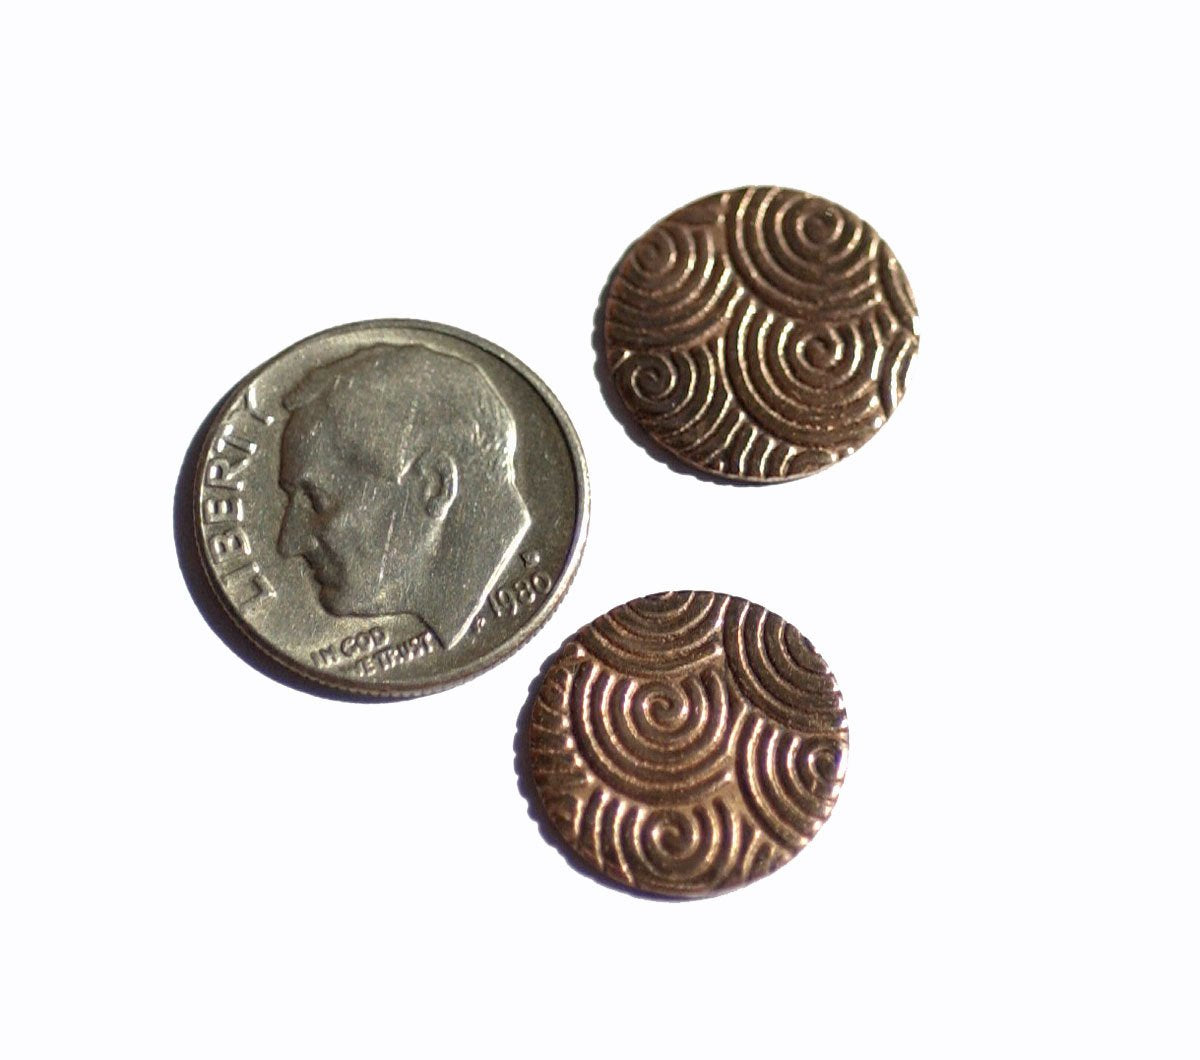 Spiral Water Disc Copper 24g 15mm Polished Textured Blanks Shape for Enameling Soldering Metalworking Blanks - 6 Pieces